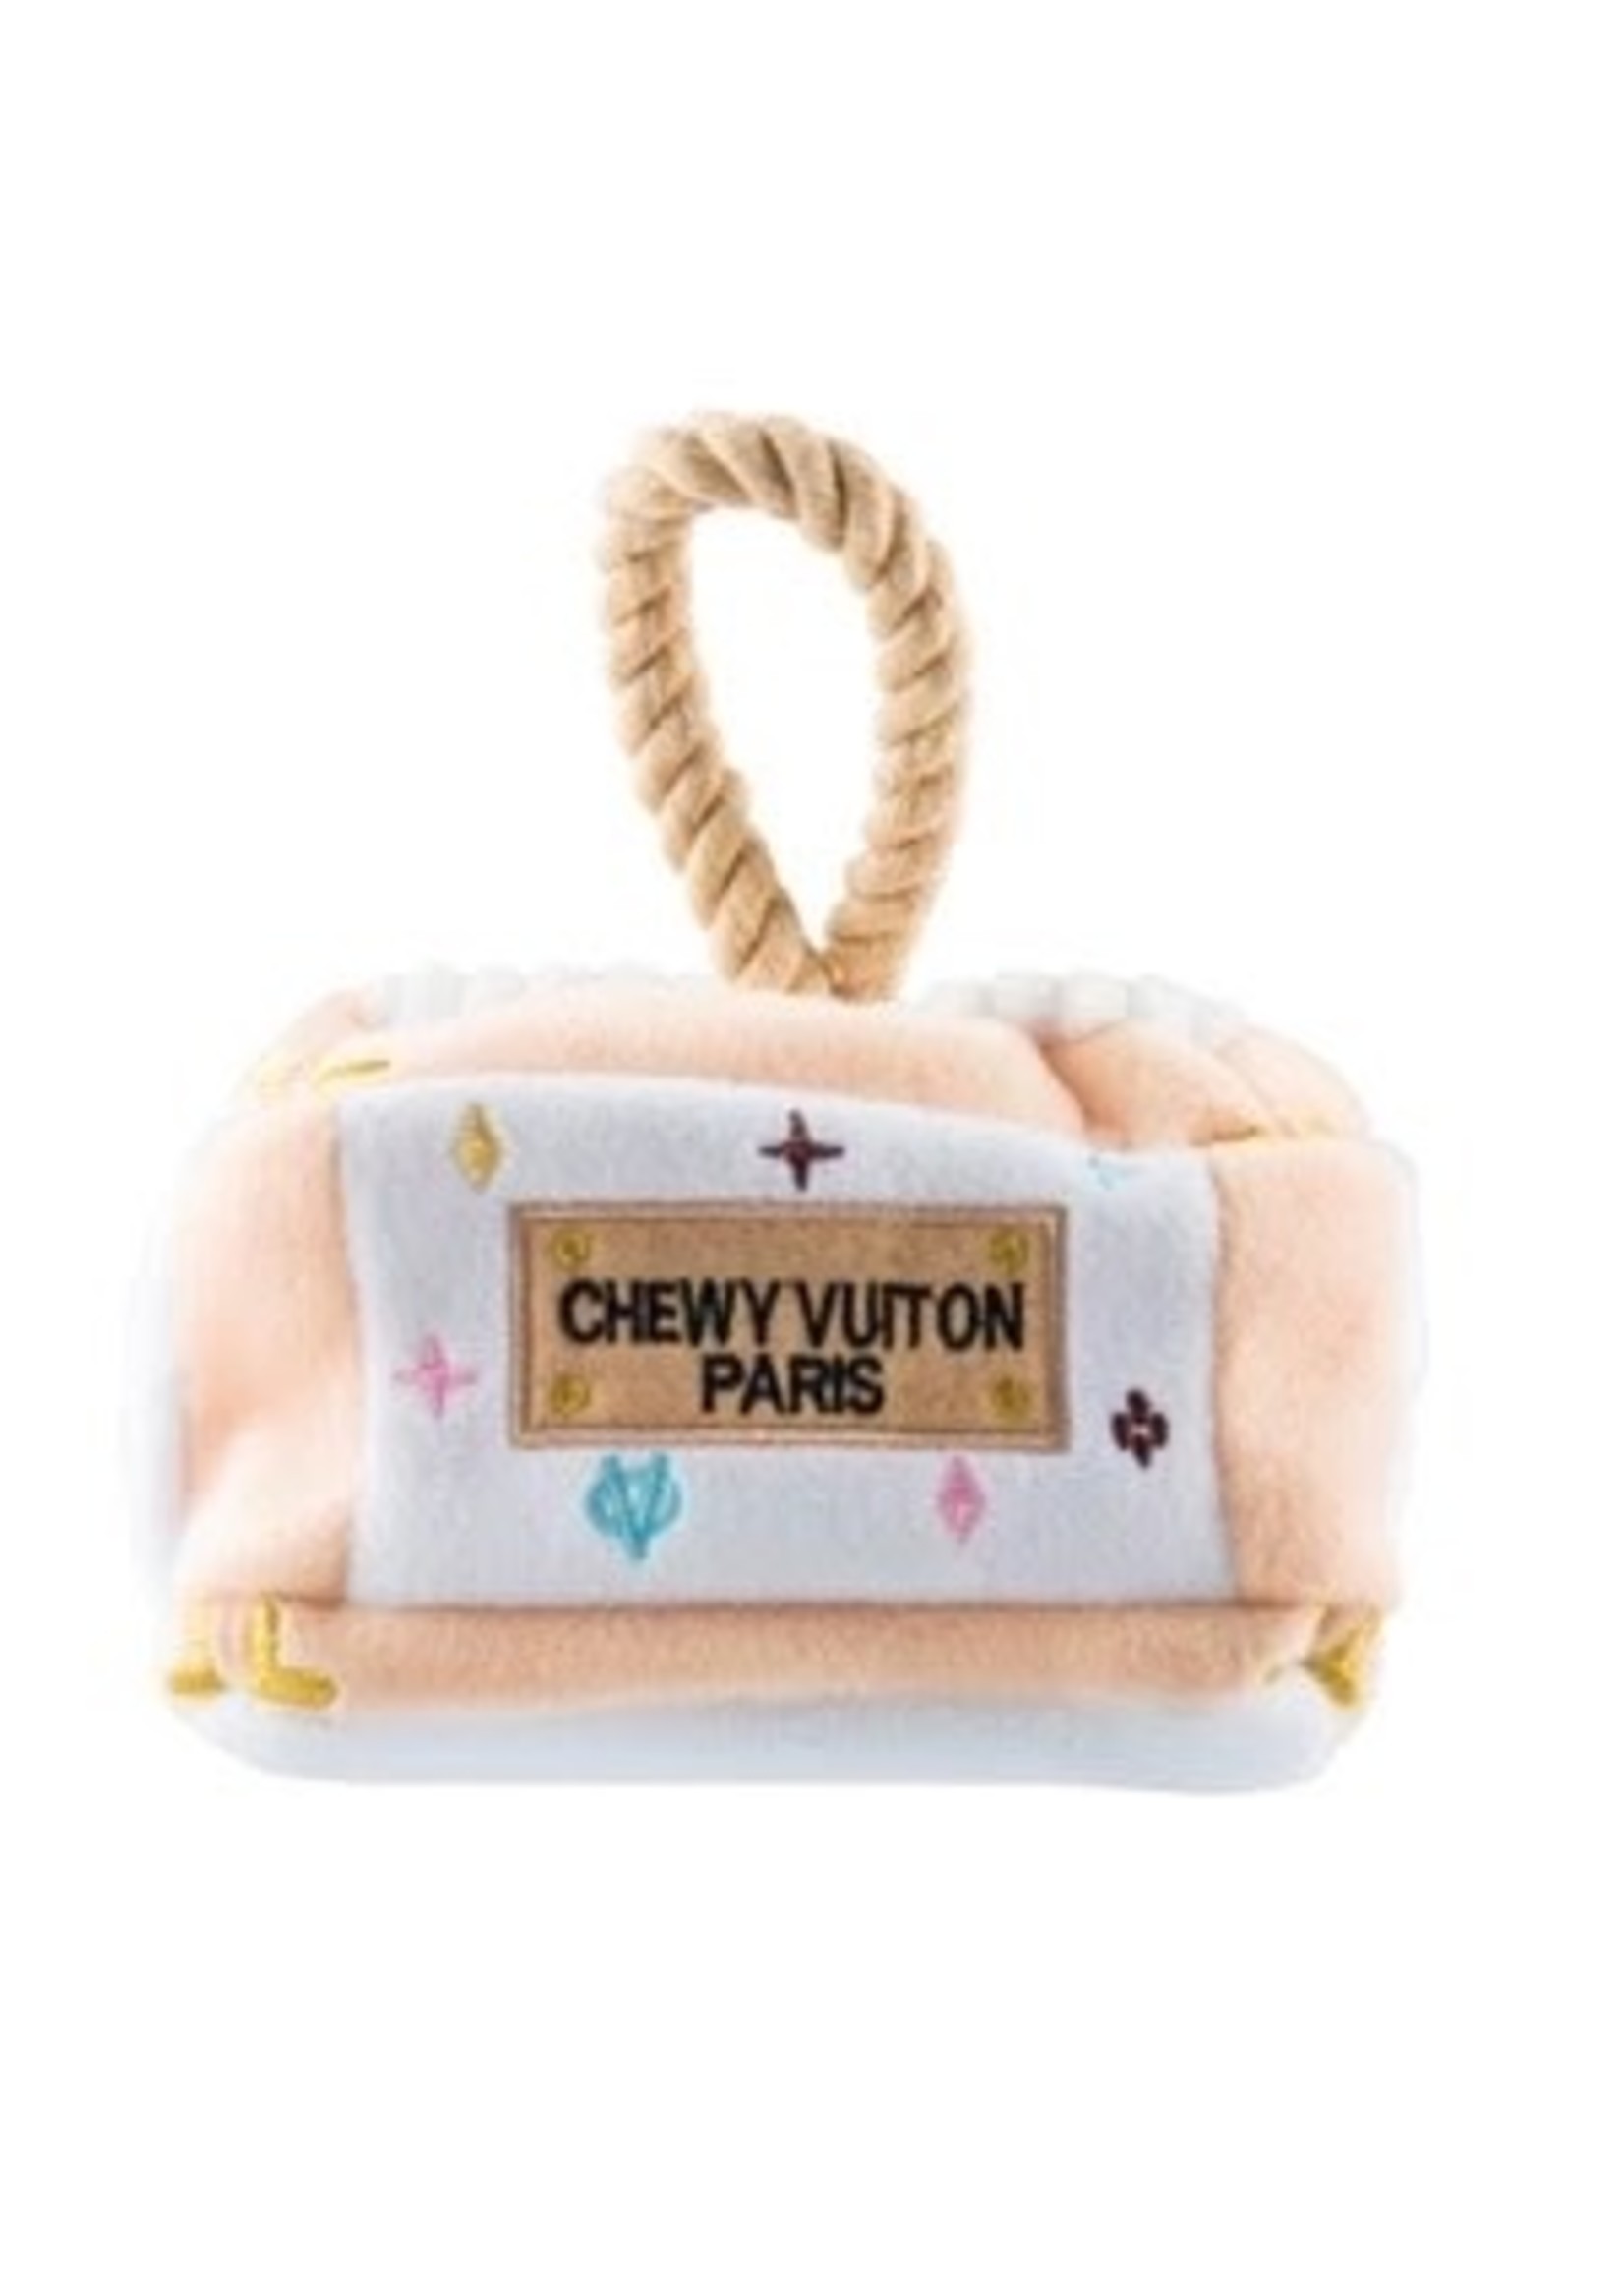 Haute Diggity Dog White Chewy Vuiton Trunk - Activity House